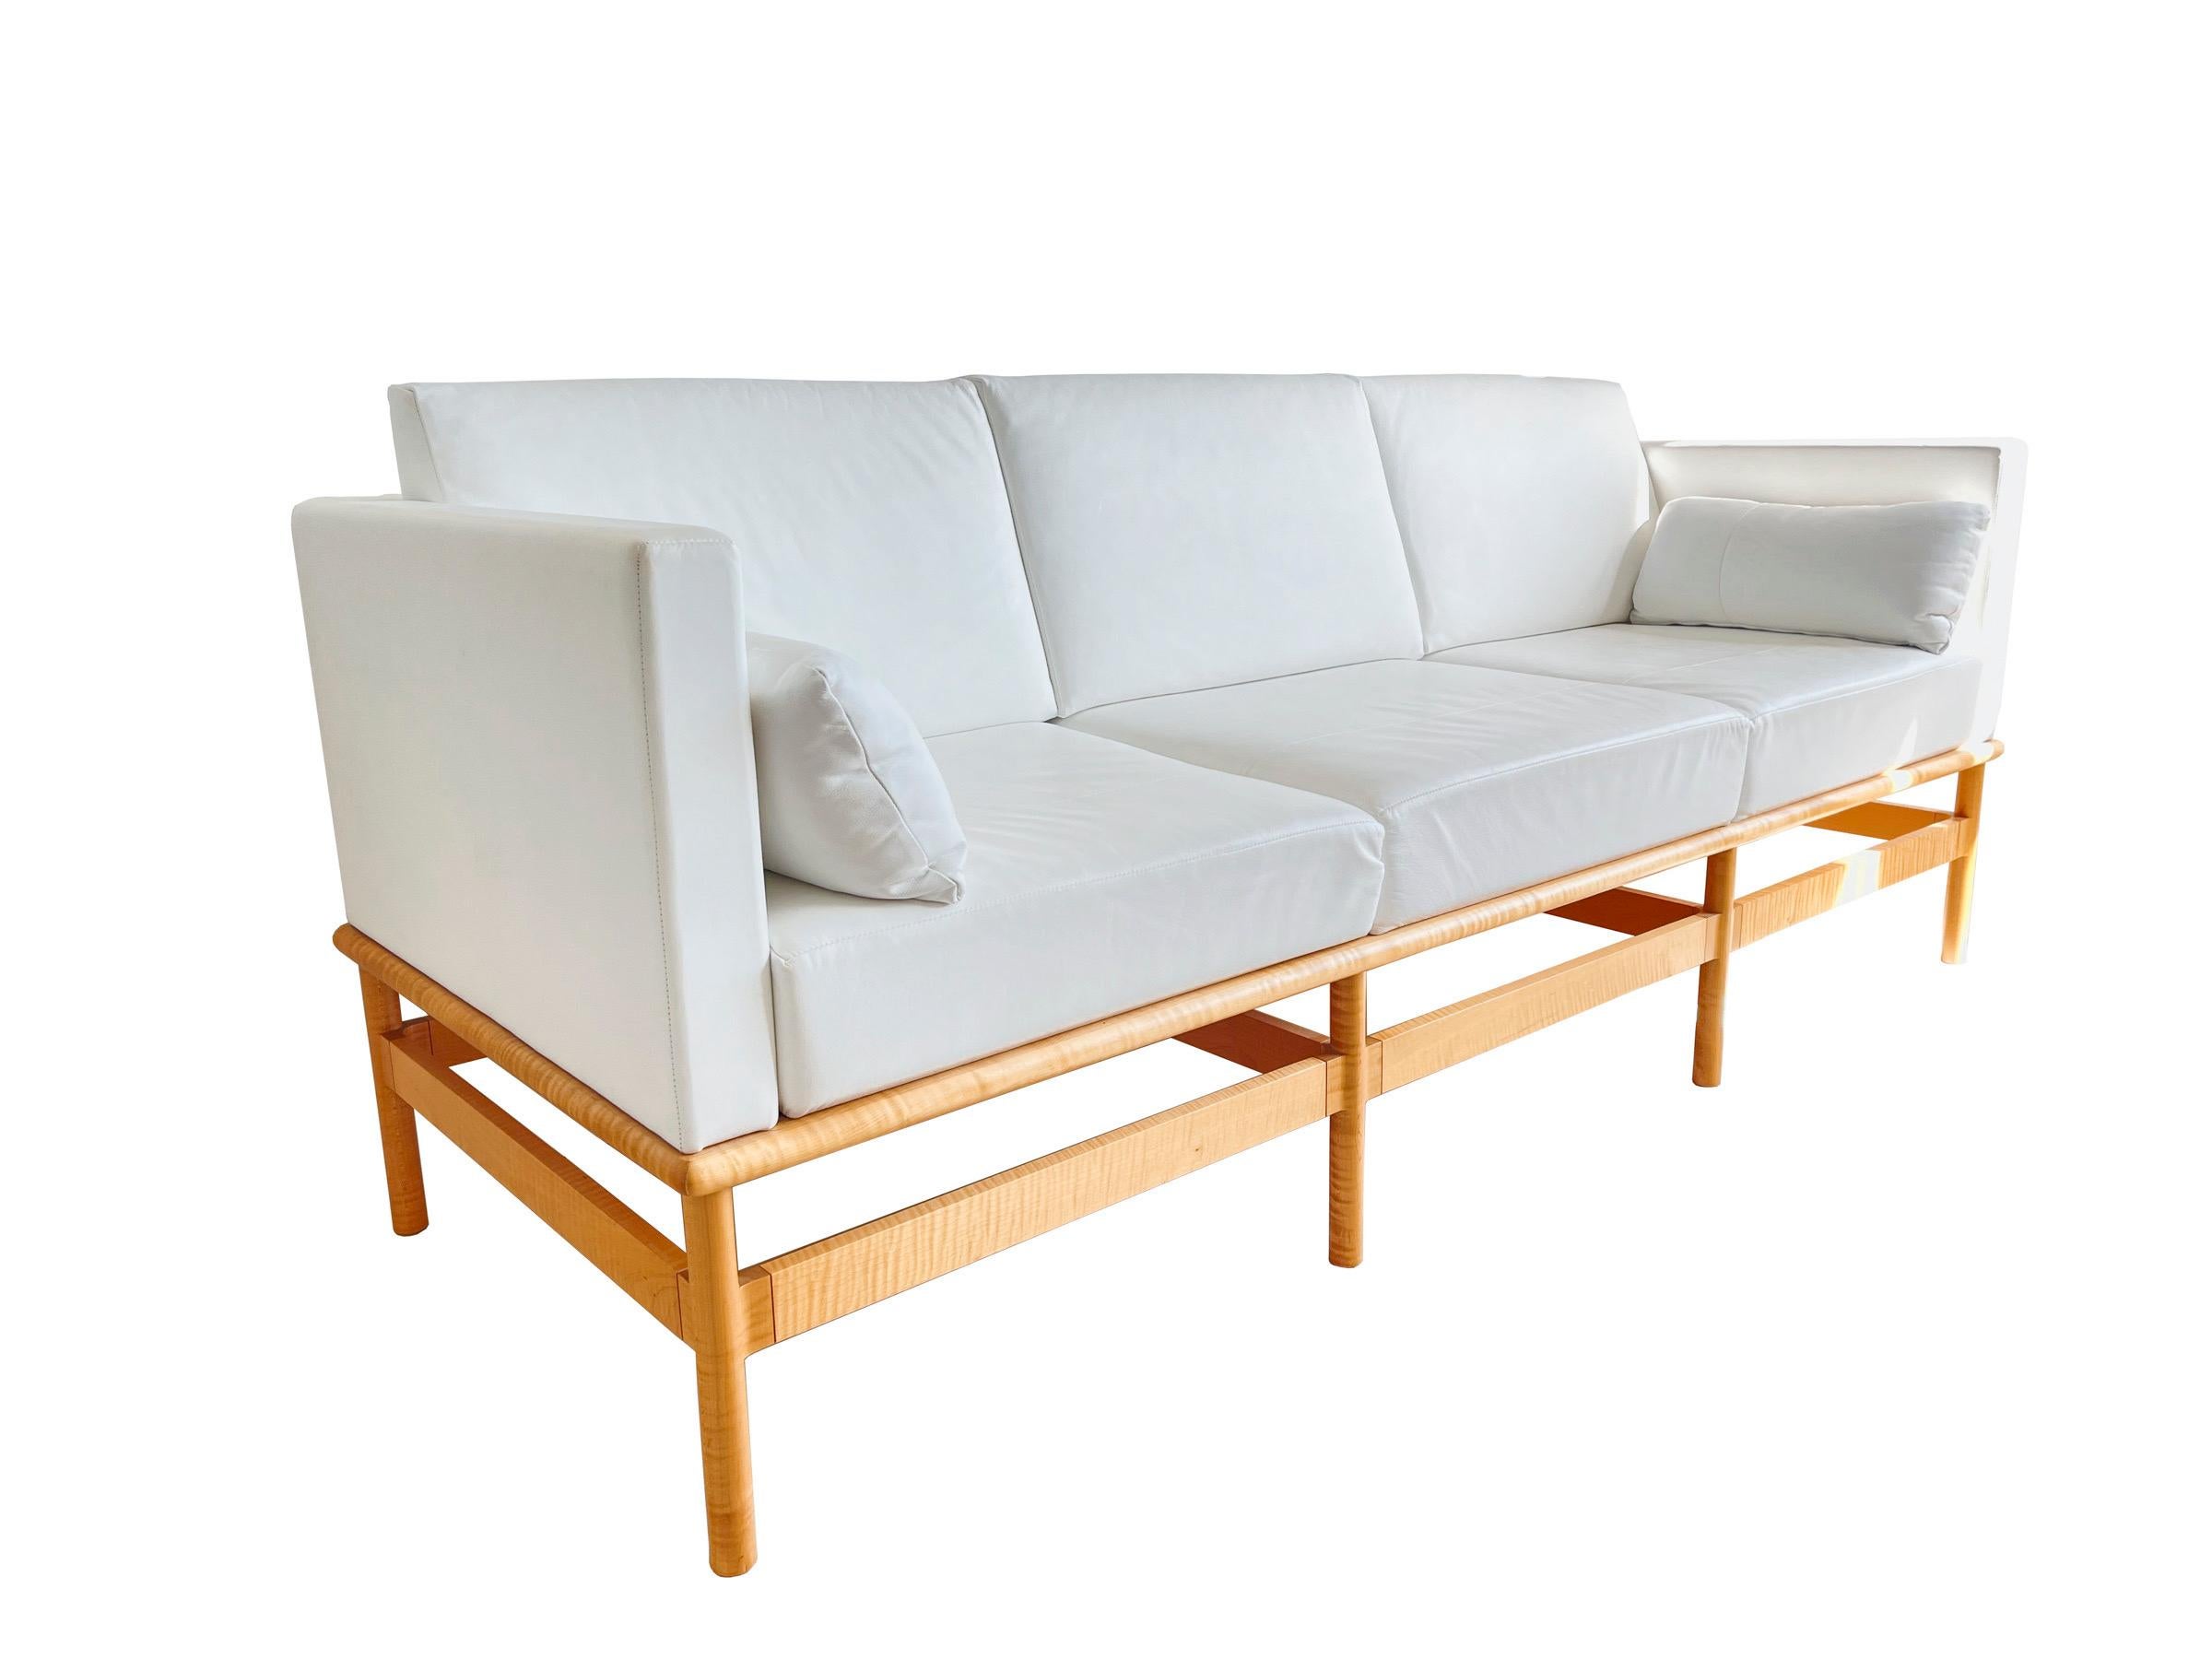 Custom Thos. Moser Hartford shelter arm sofa rendered in white leather upholstery with three removable loose back cushions and two lumbar pillows, supported by an architectural frame of hand crafted Fig Maple, designed and Manufactured by Thomas